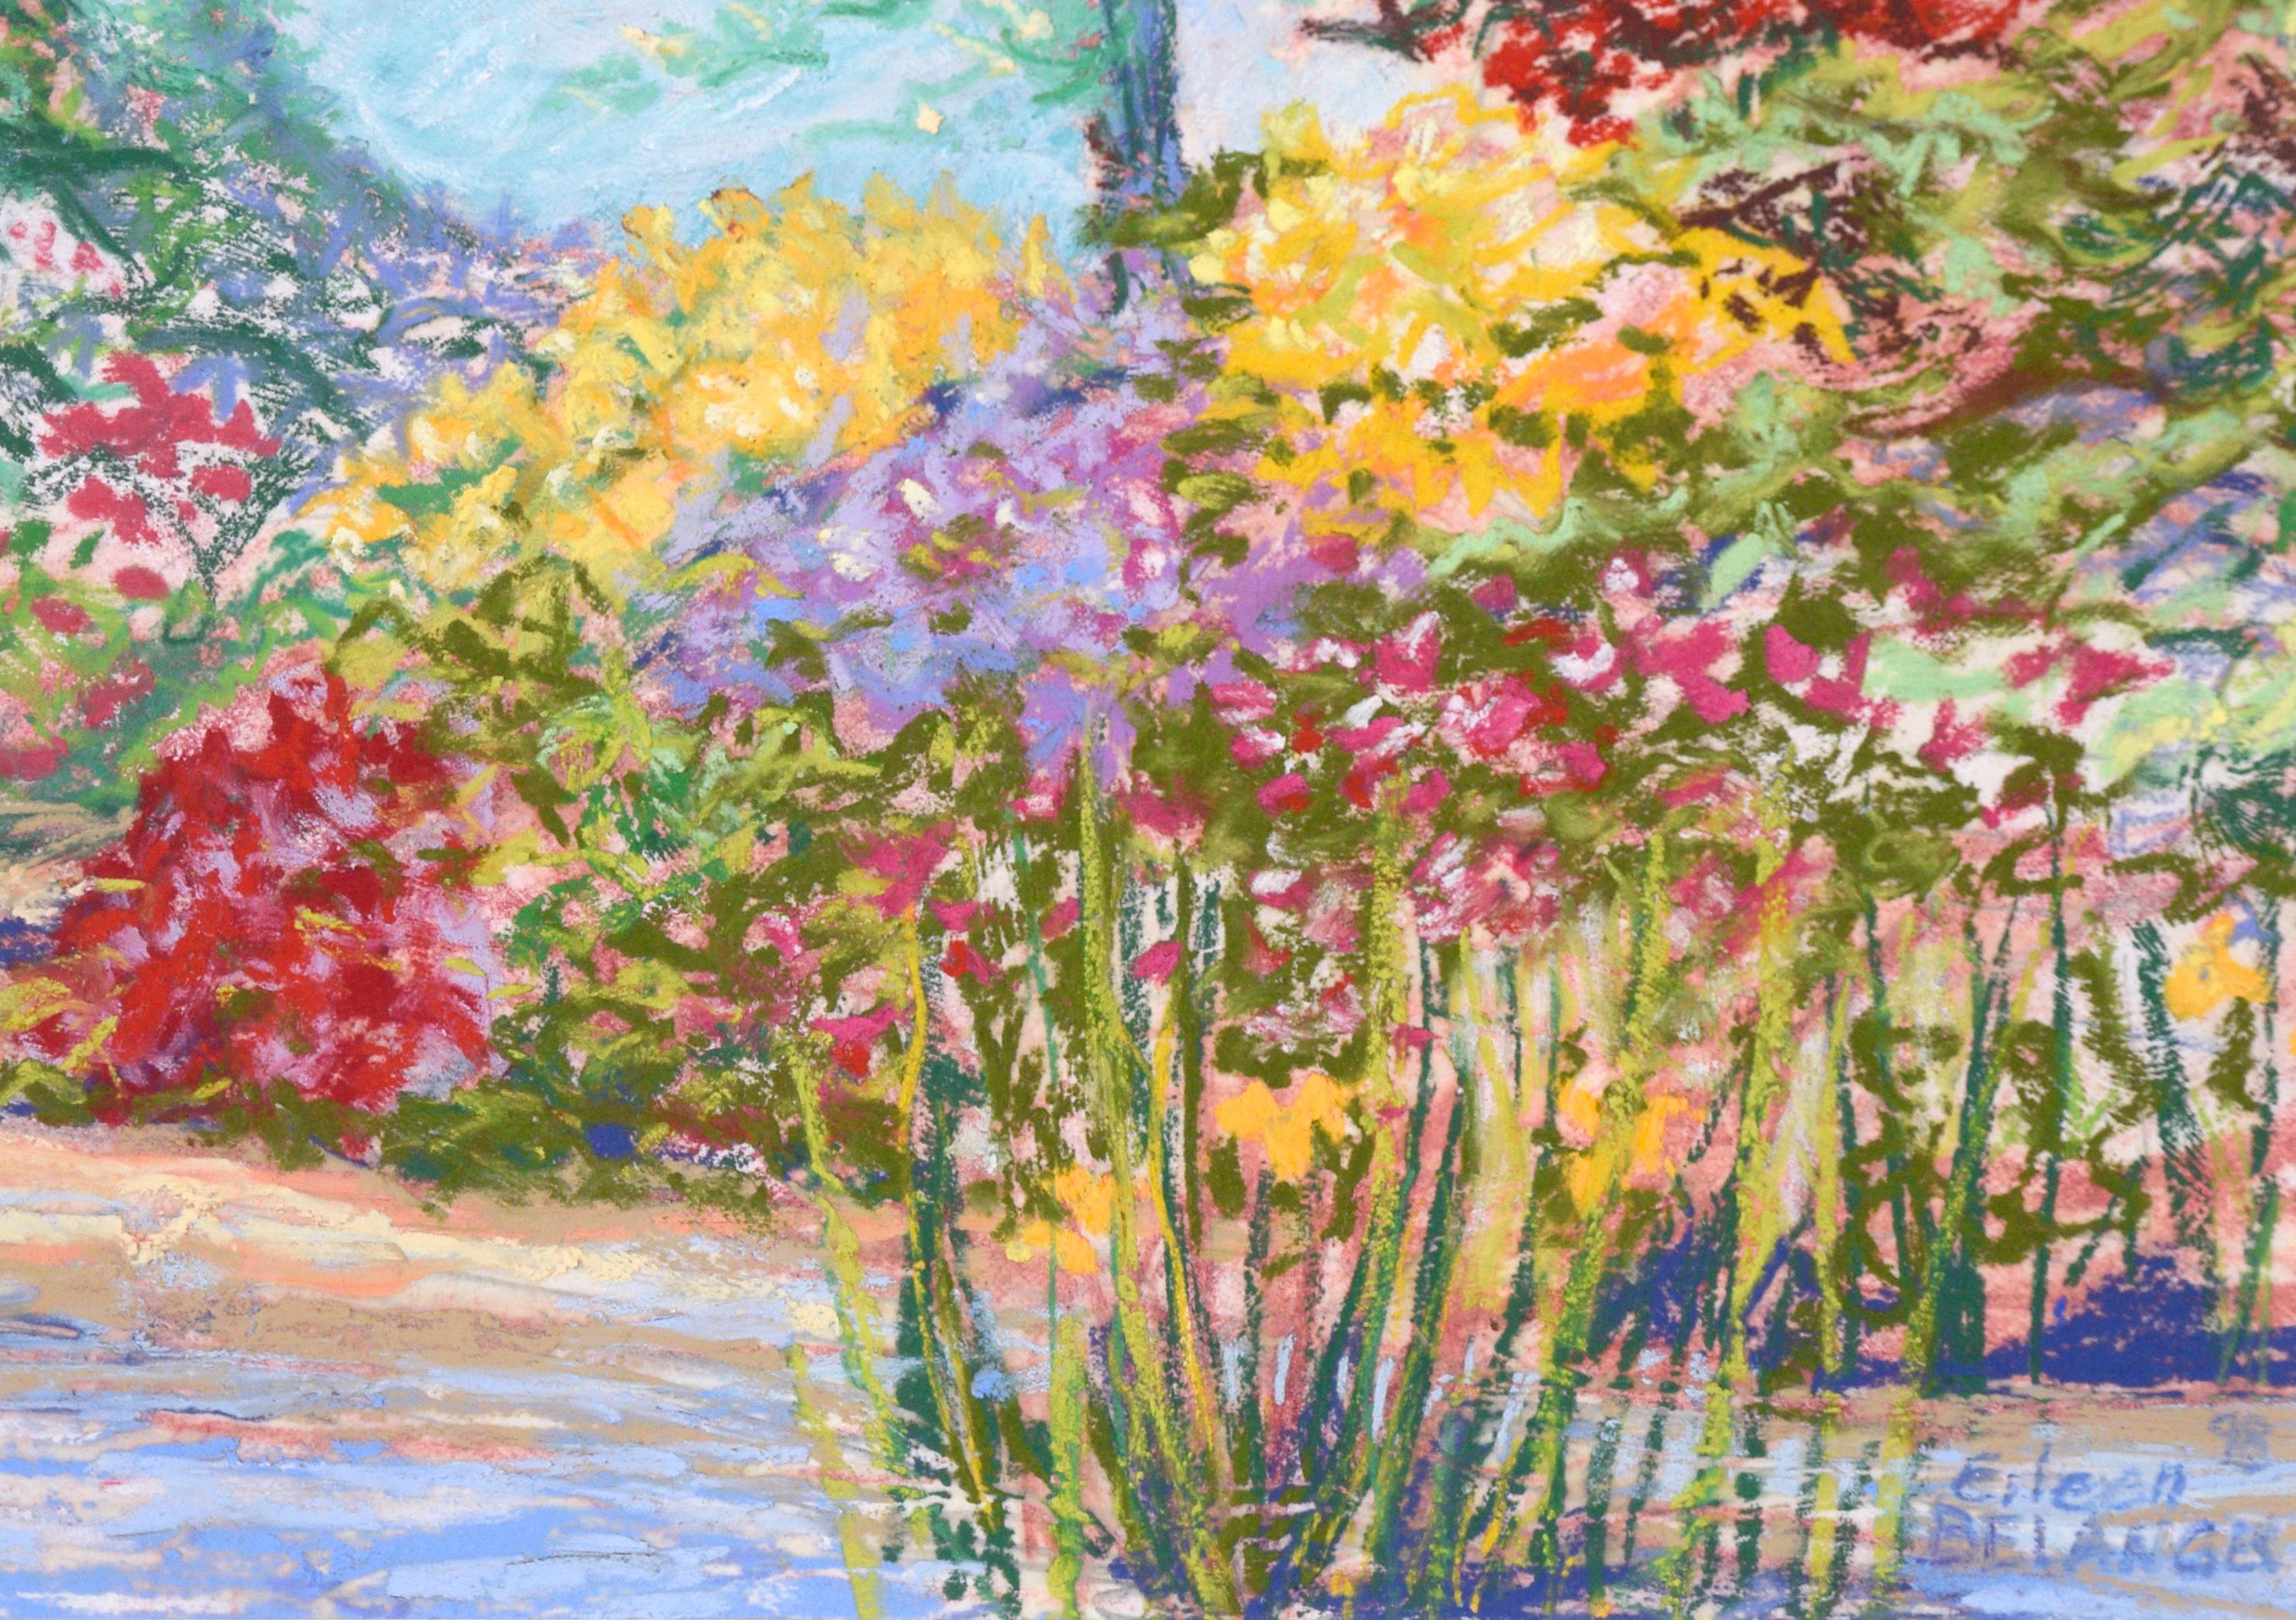 Over the Pastel Garden Wall - New England - Original Oil Pastel on Paper 1998 For Sale 1